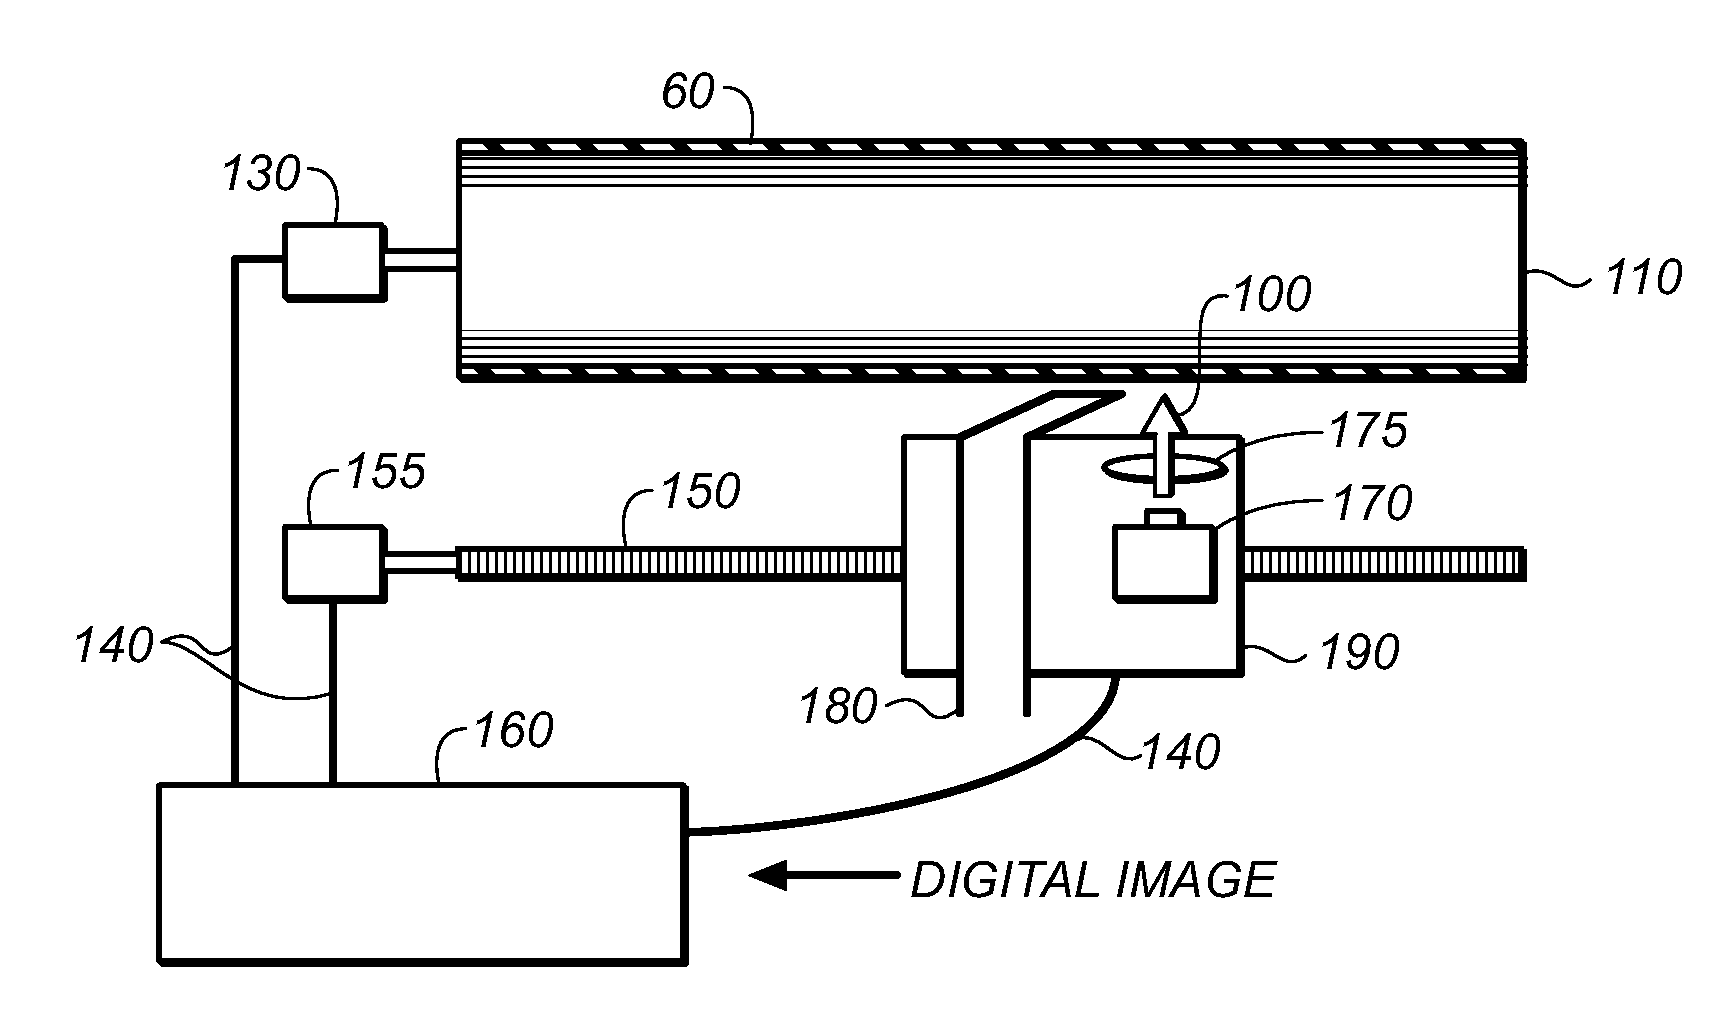 Method for direct engraving of flexographic printing members